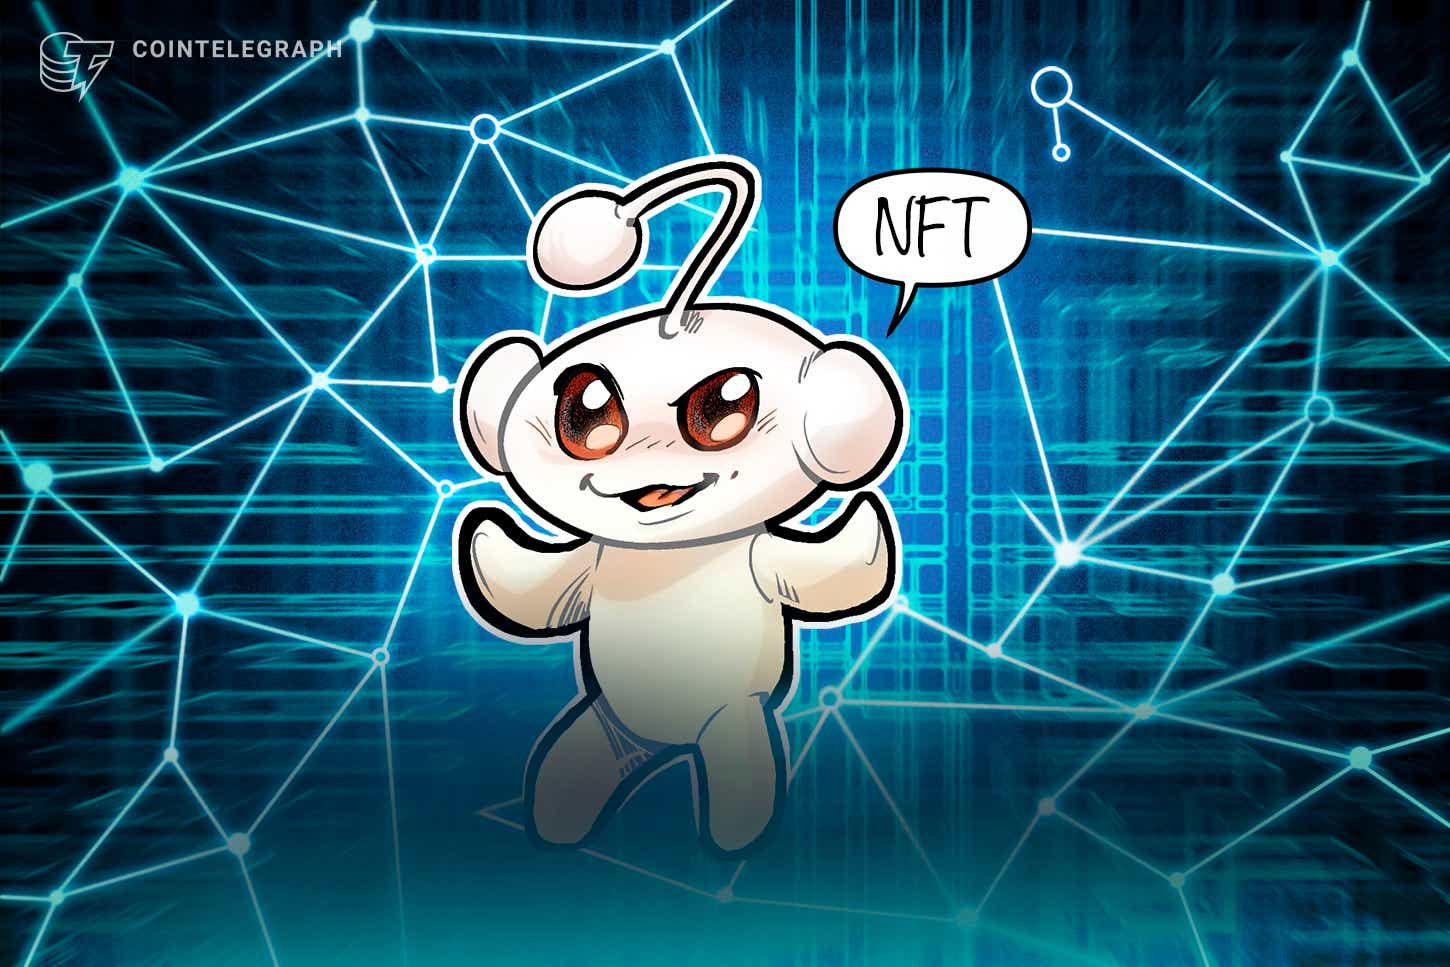 Reddit is testing out NFT profile pics, but ‘no decisions have been made’